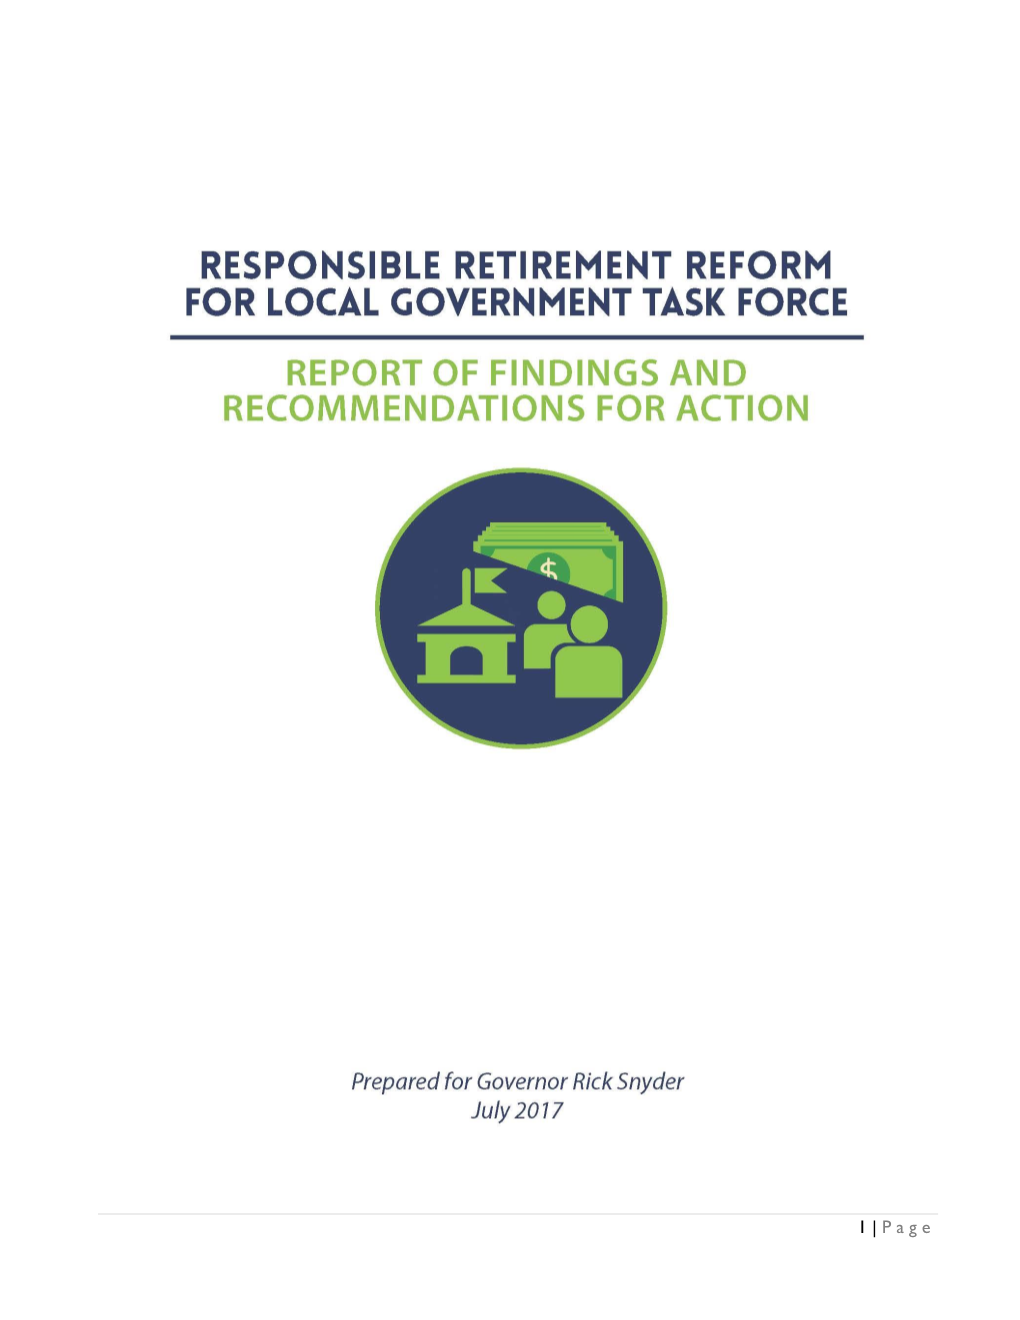 Task Force Report for Responsible Retirement Reform